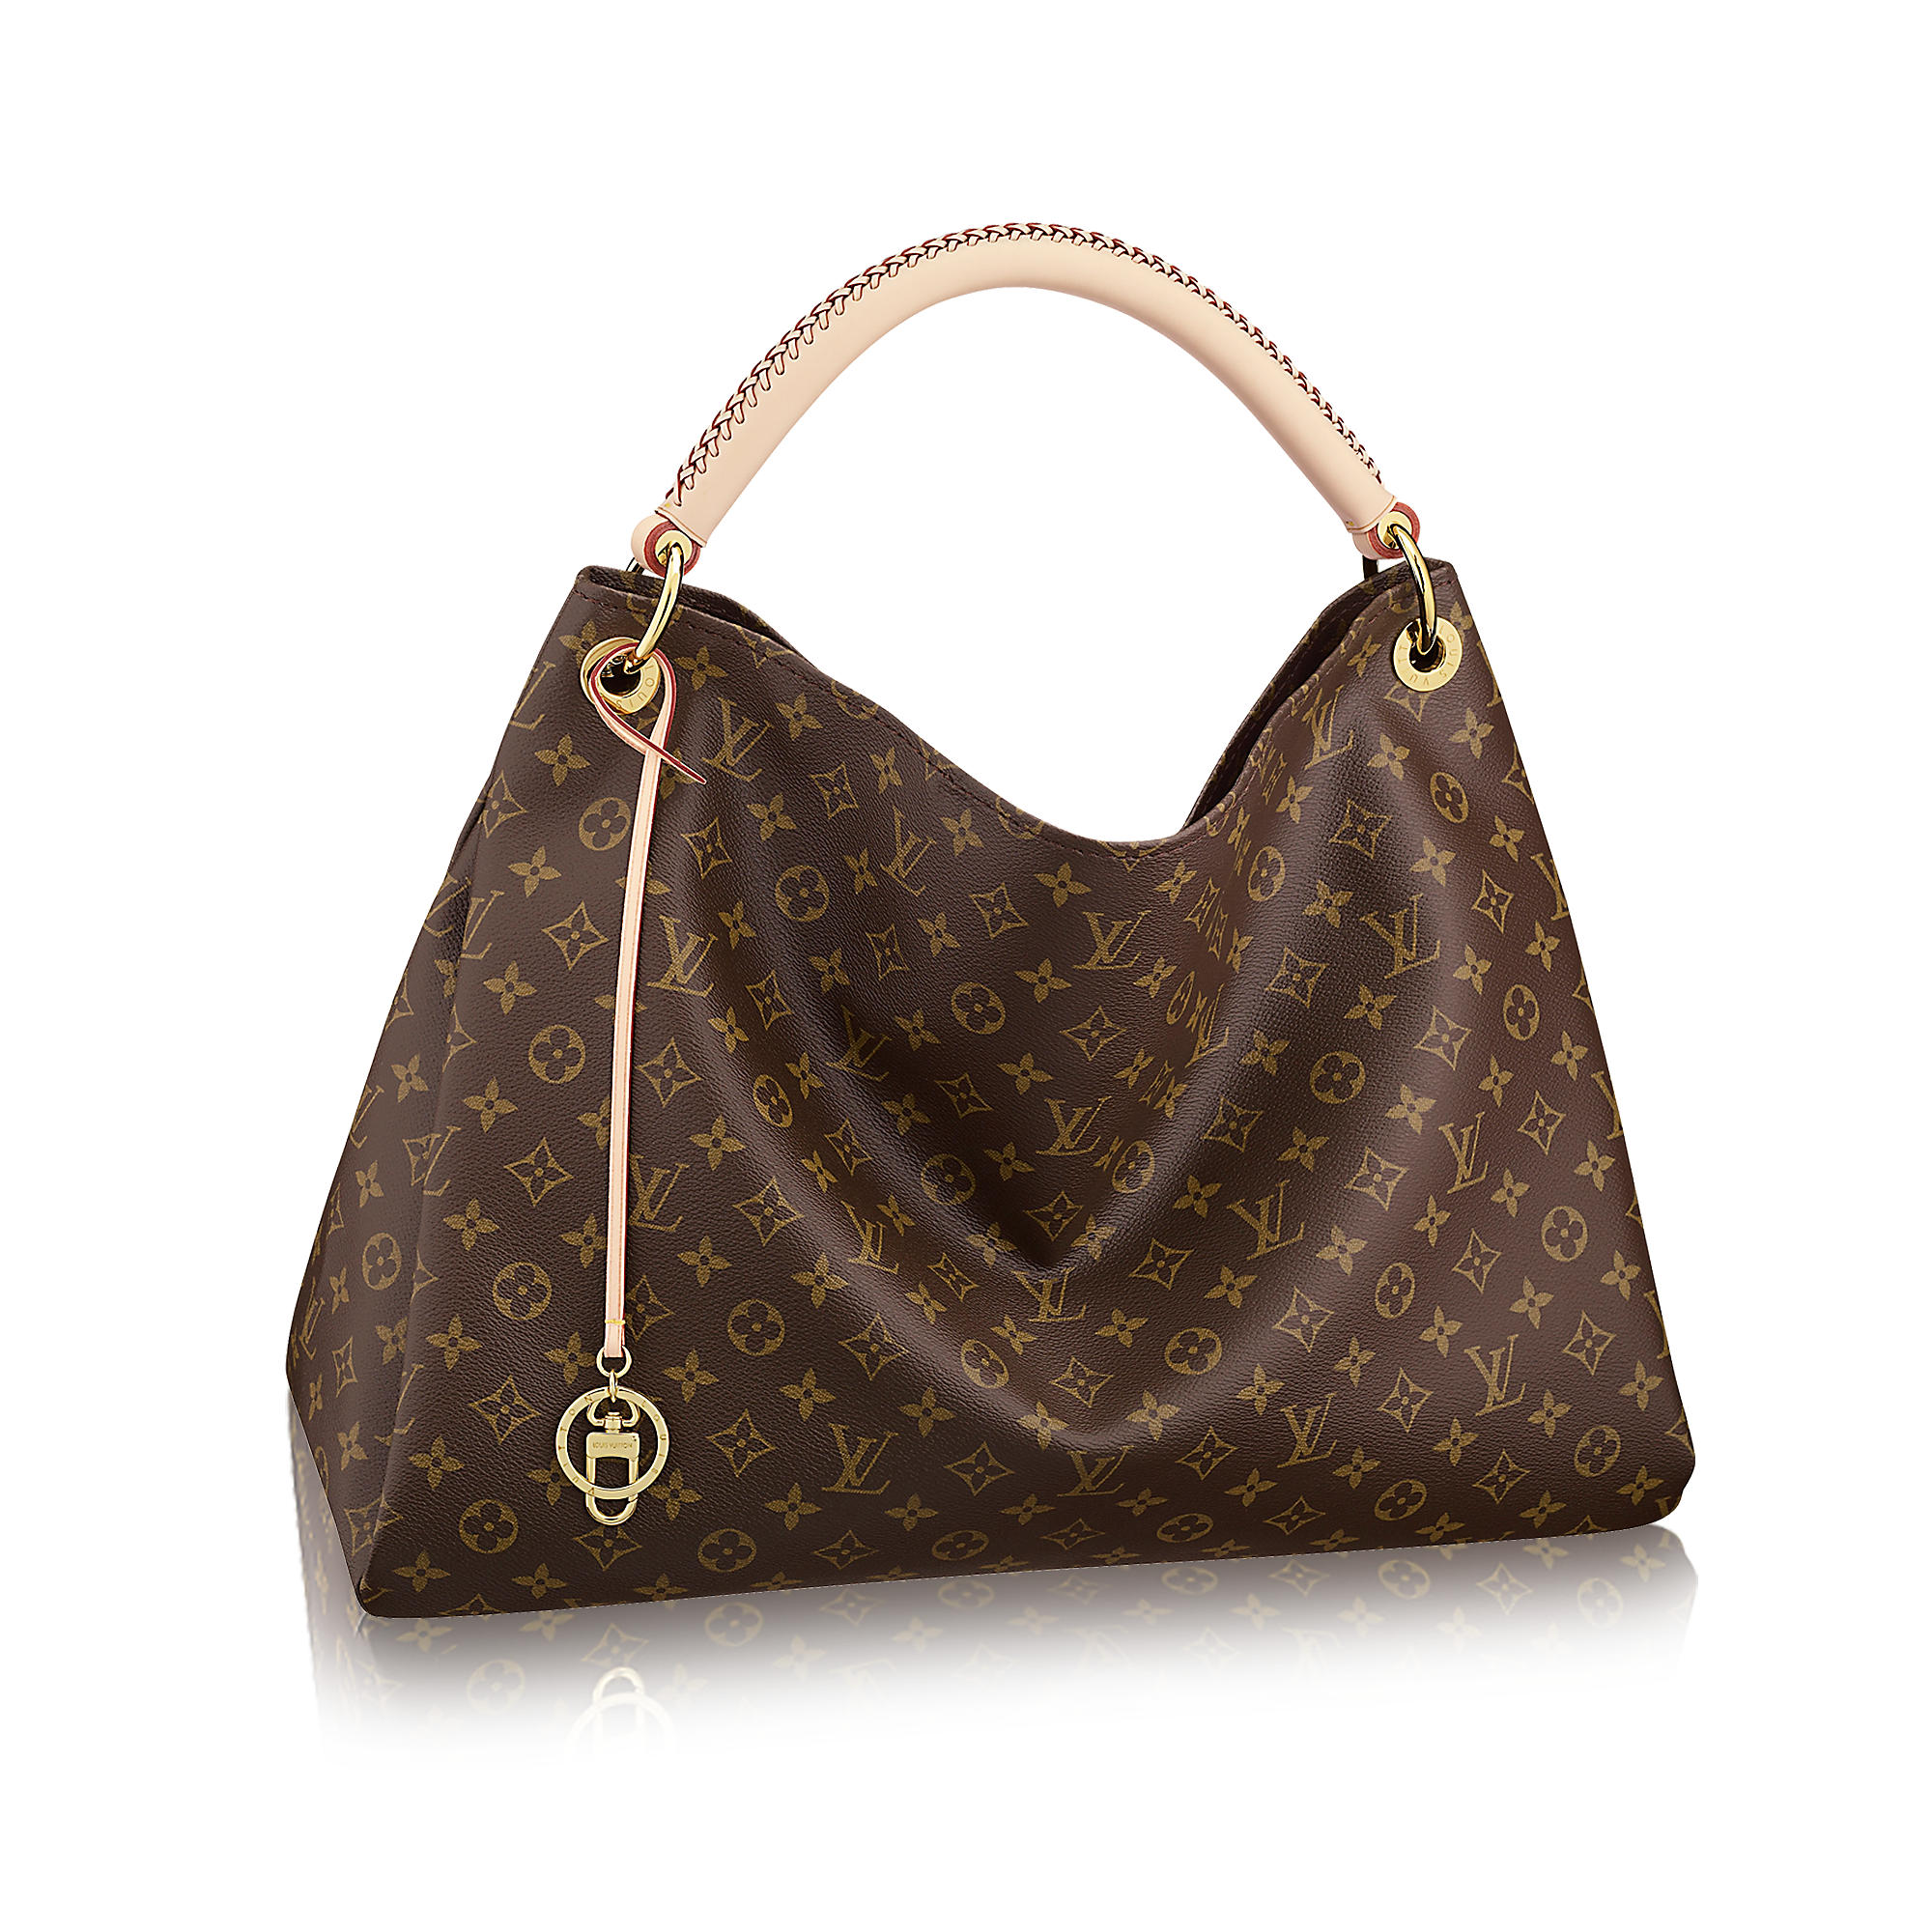 Useful Guide to Purchase Louis Vuitton Bags